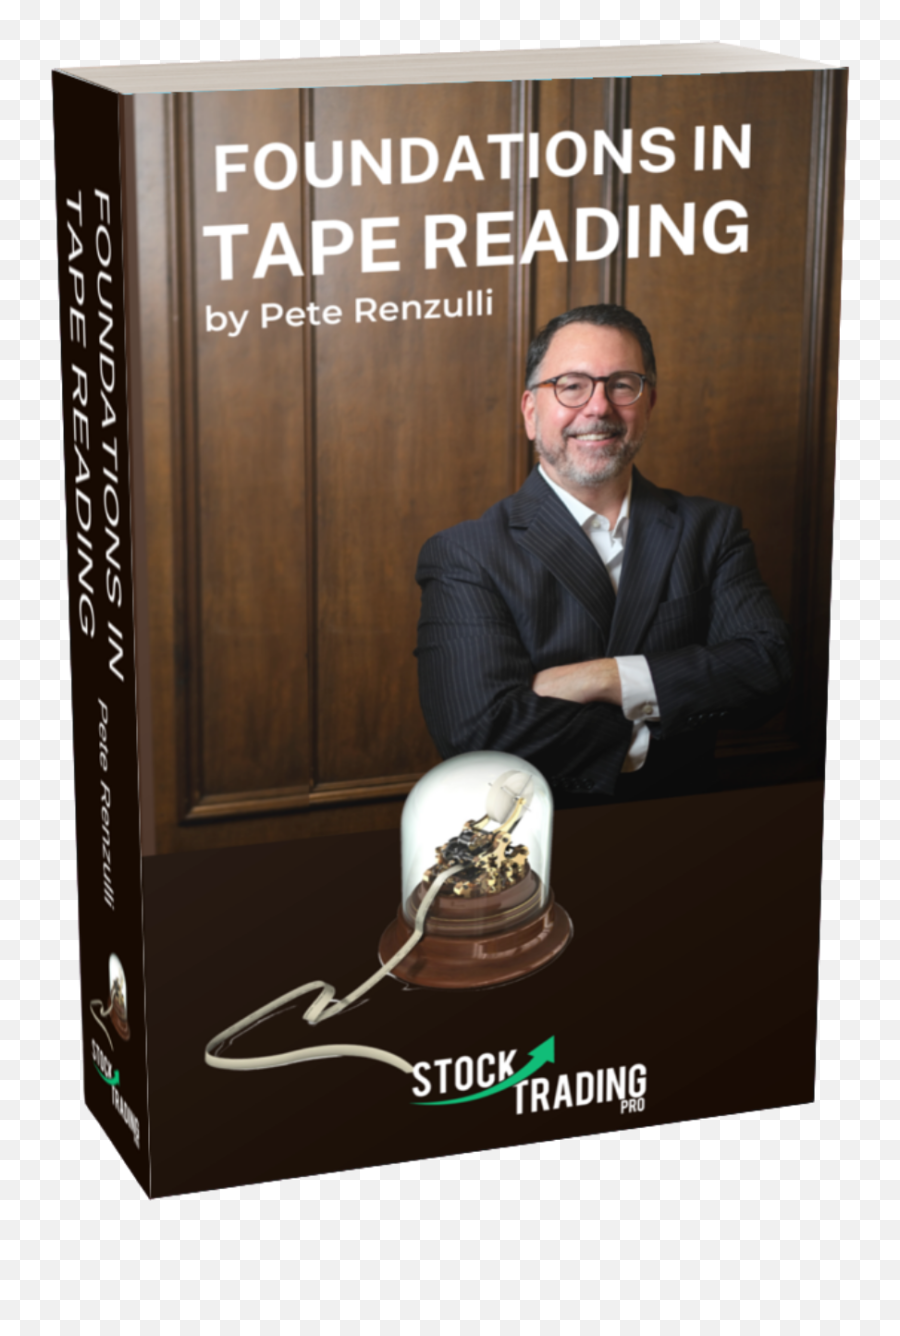 Order Flow Mastery Tape Reading Stock Trading Pro - Gentleman Emoji,Trading Emotions For True Love